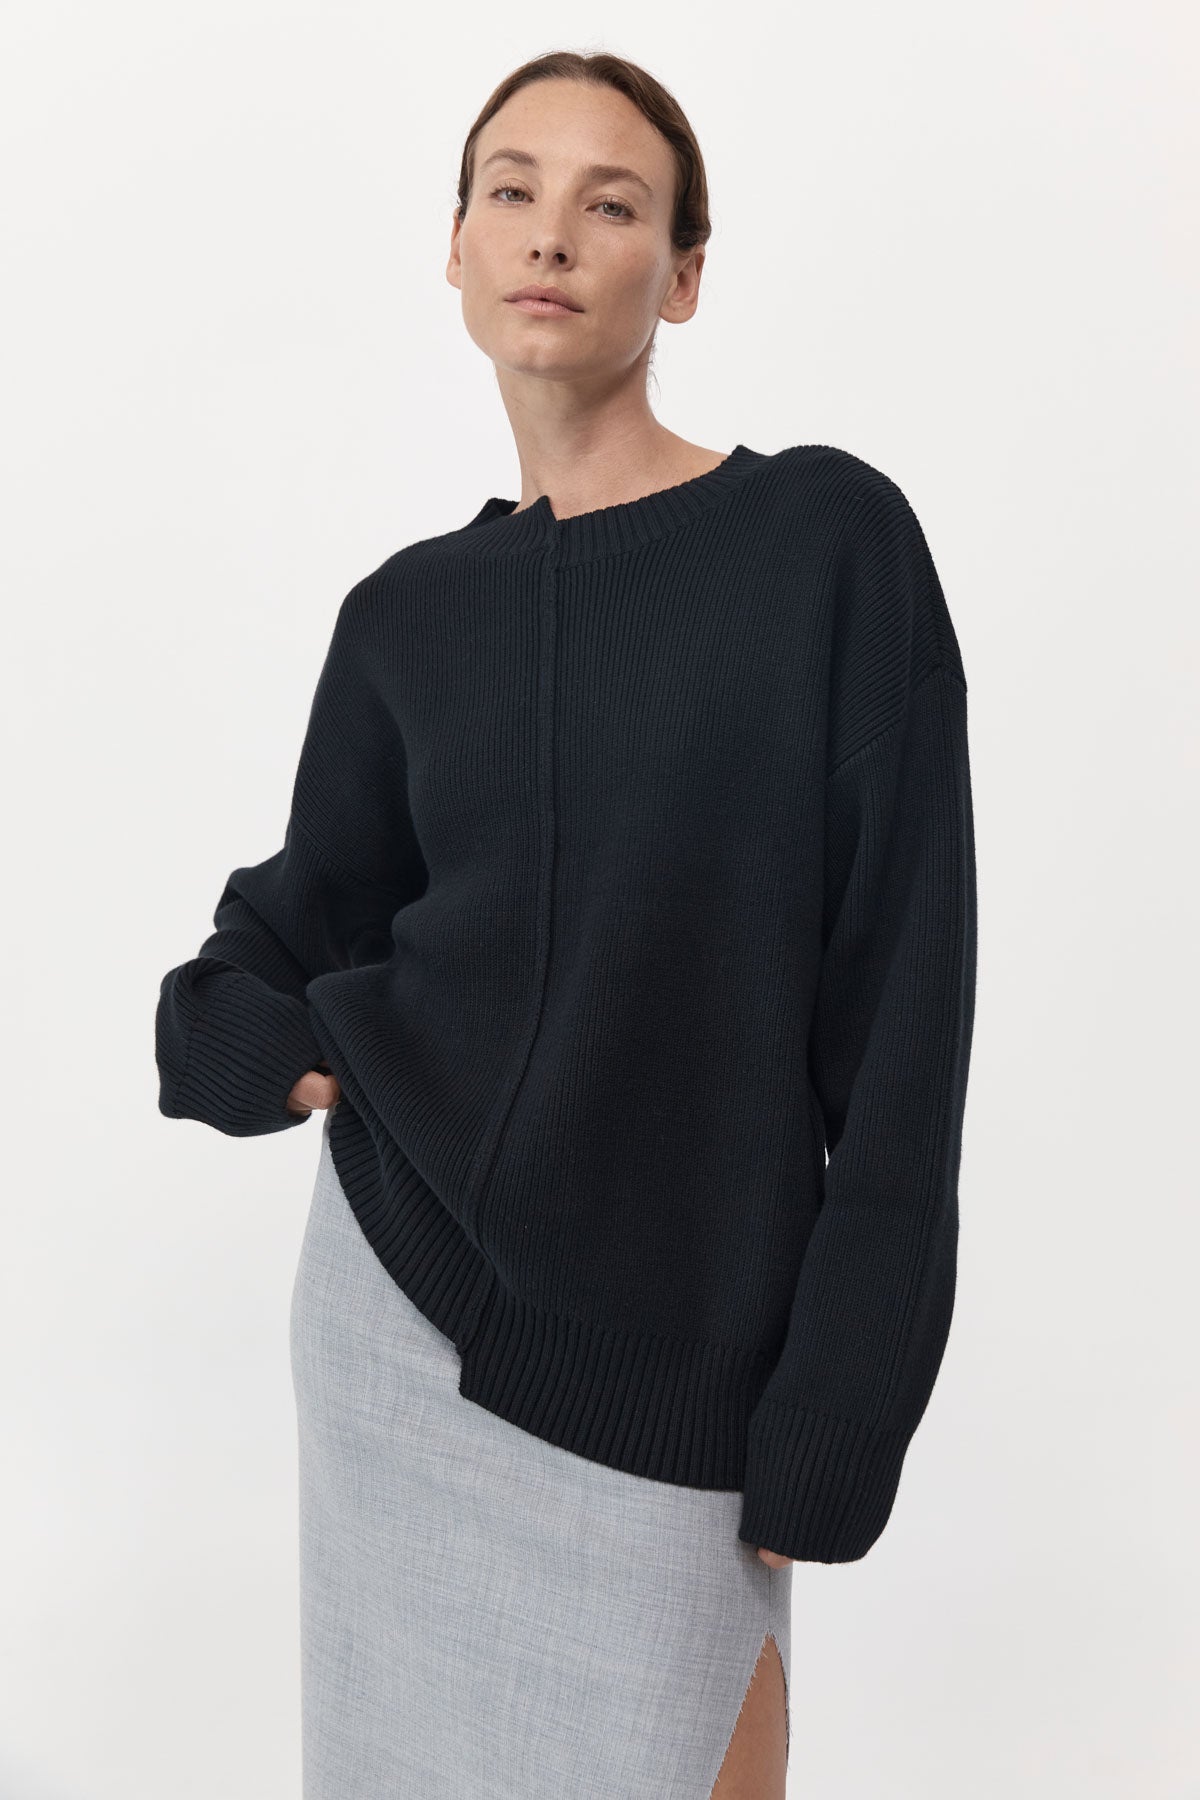 Deconstructed Pullover - Black